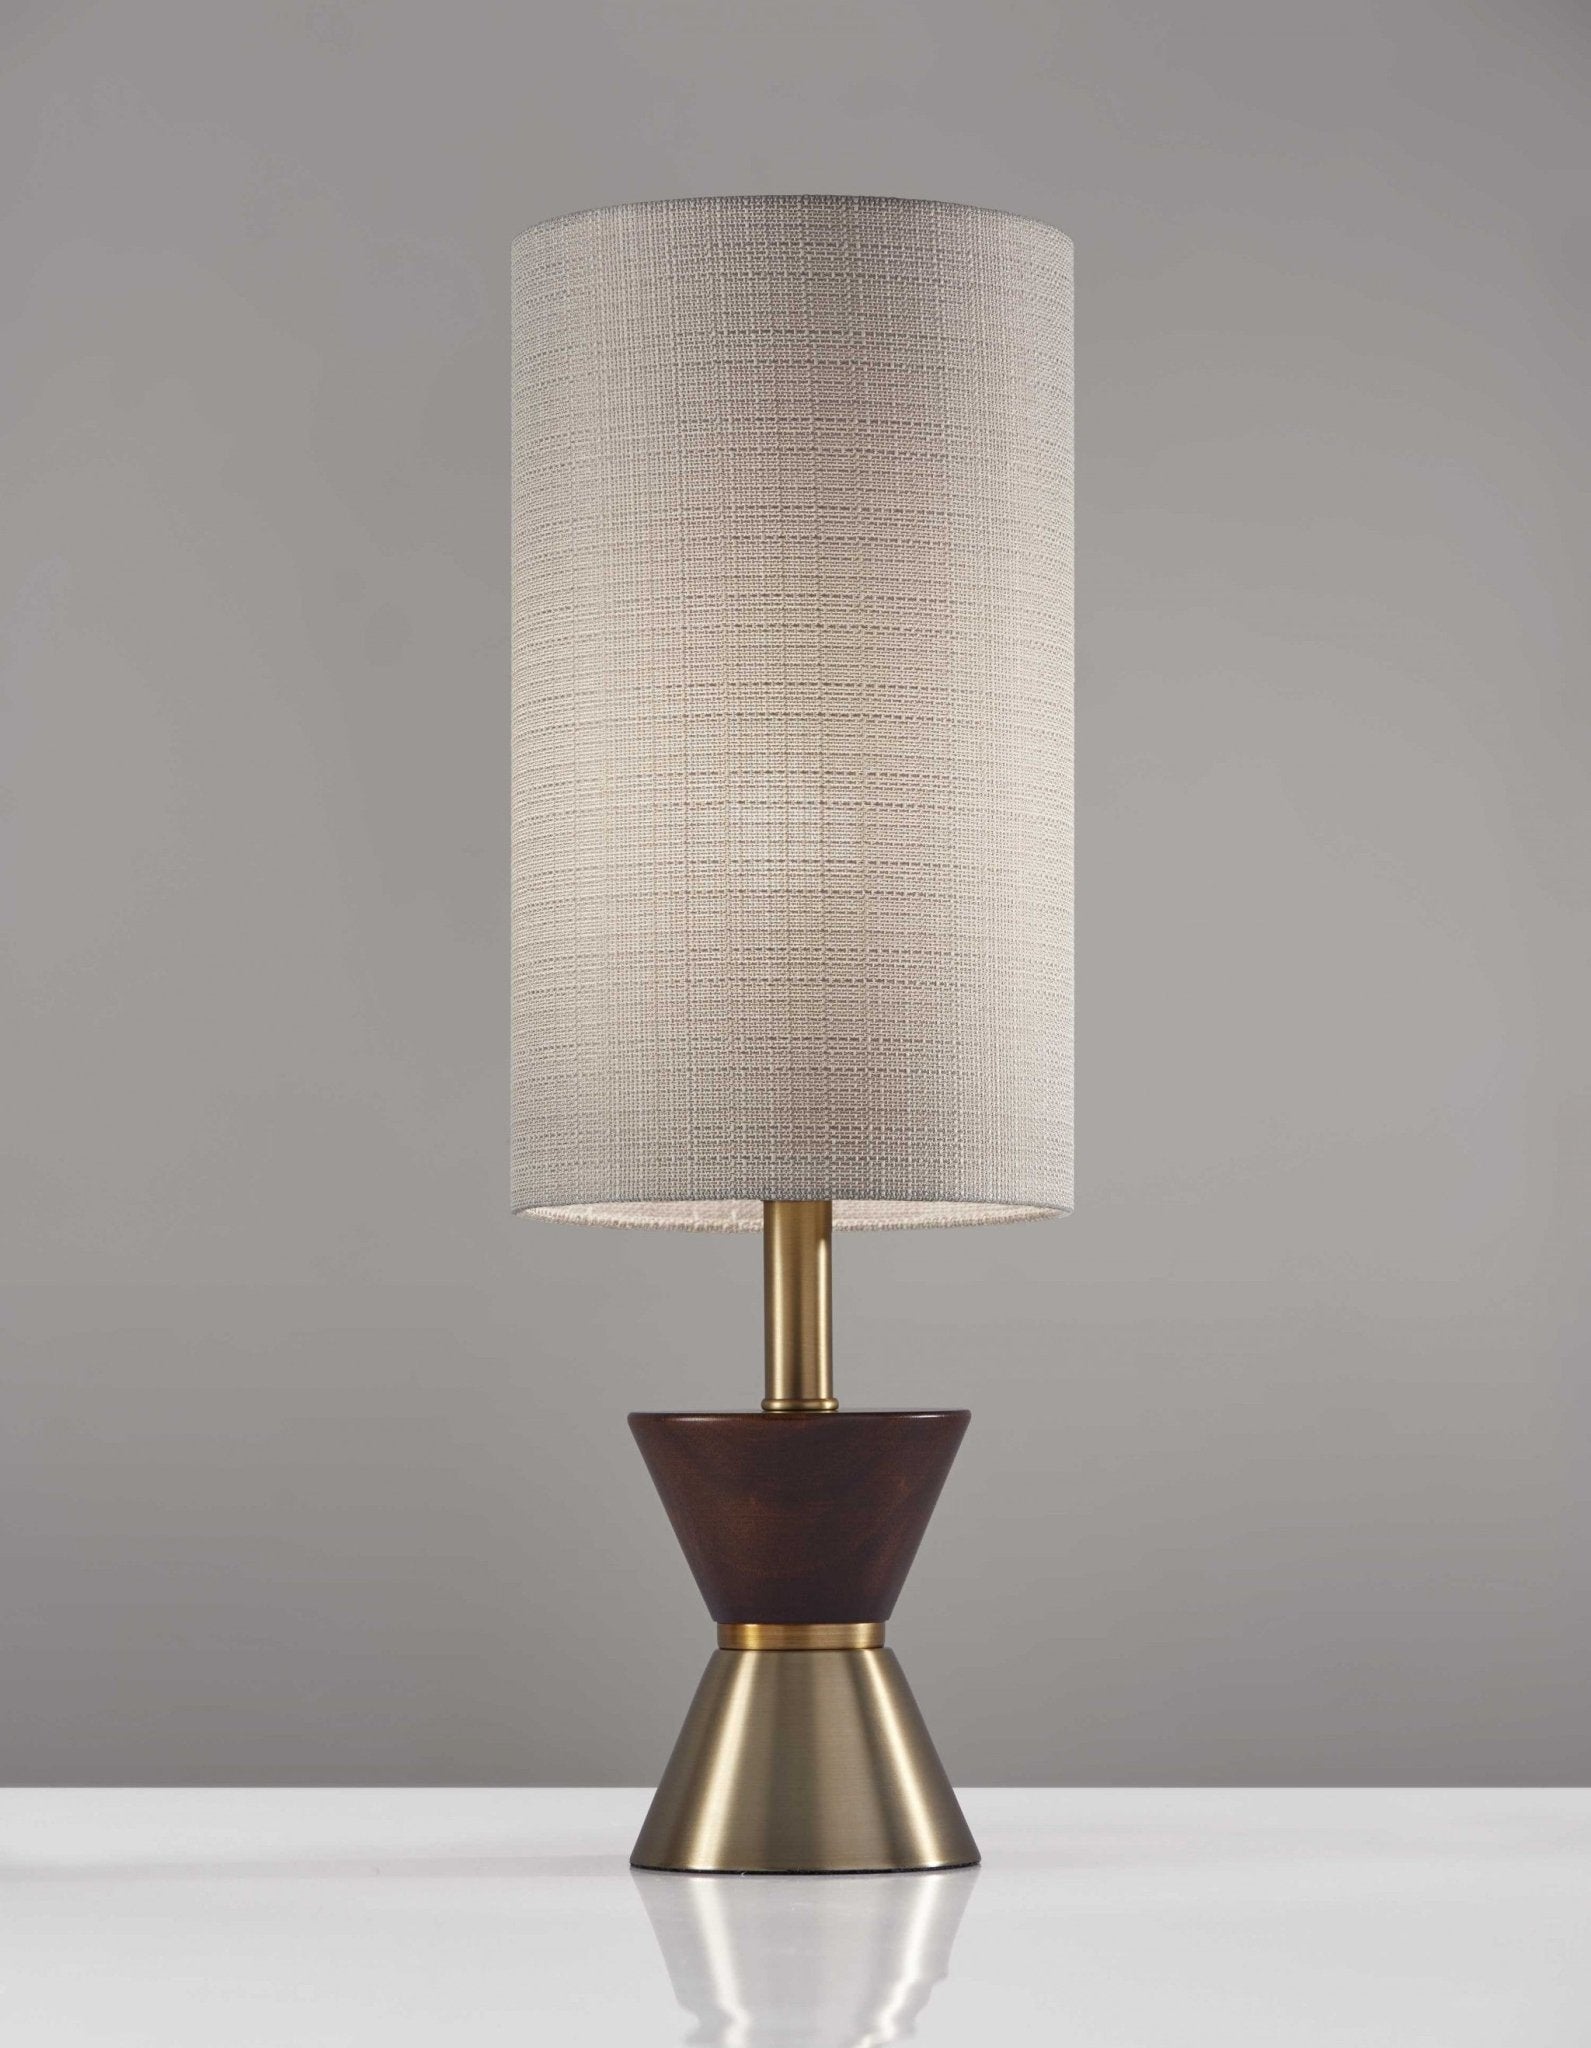 Brass-Wood-Metal-Diabolo-Table-Lamp-Table-Lamps